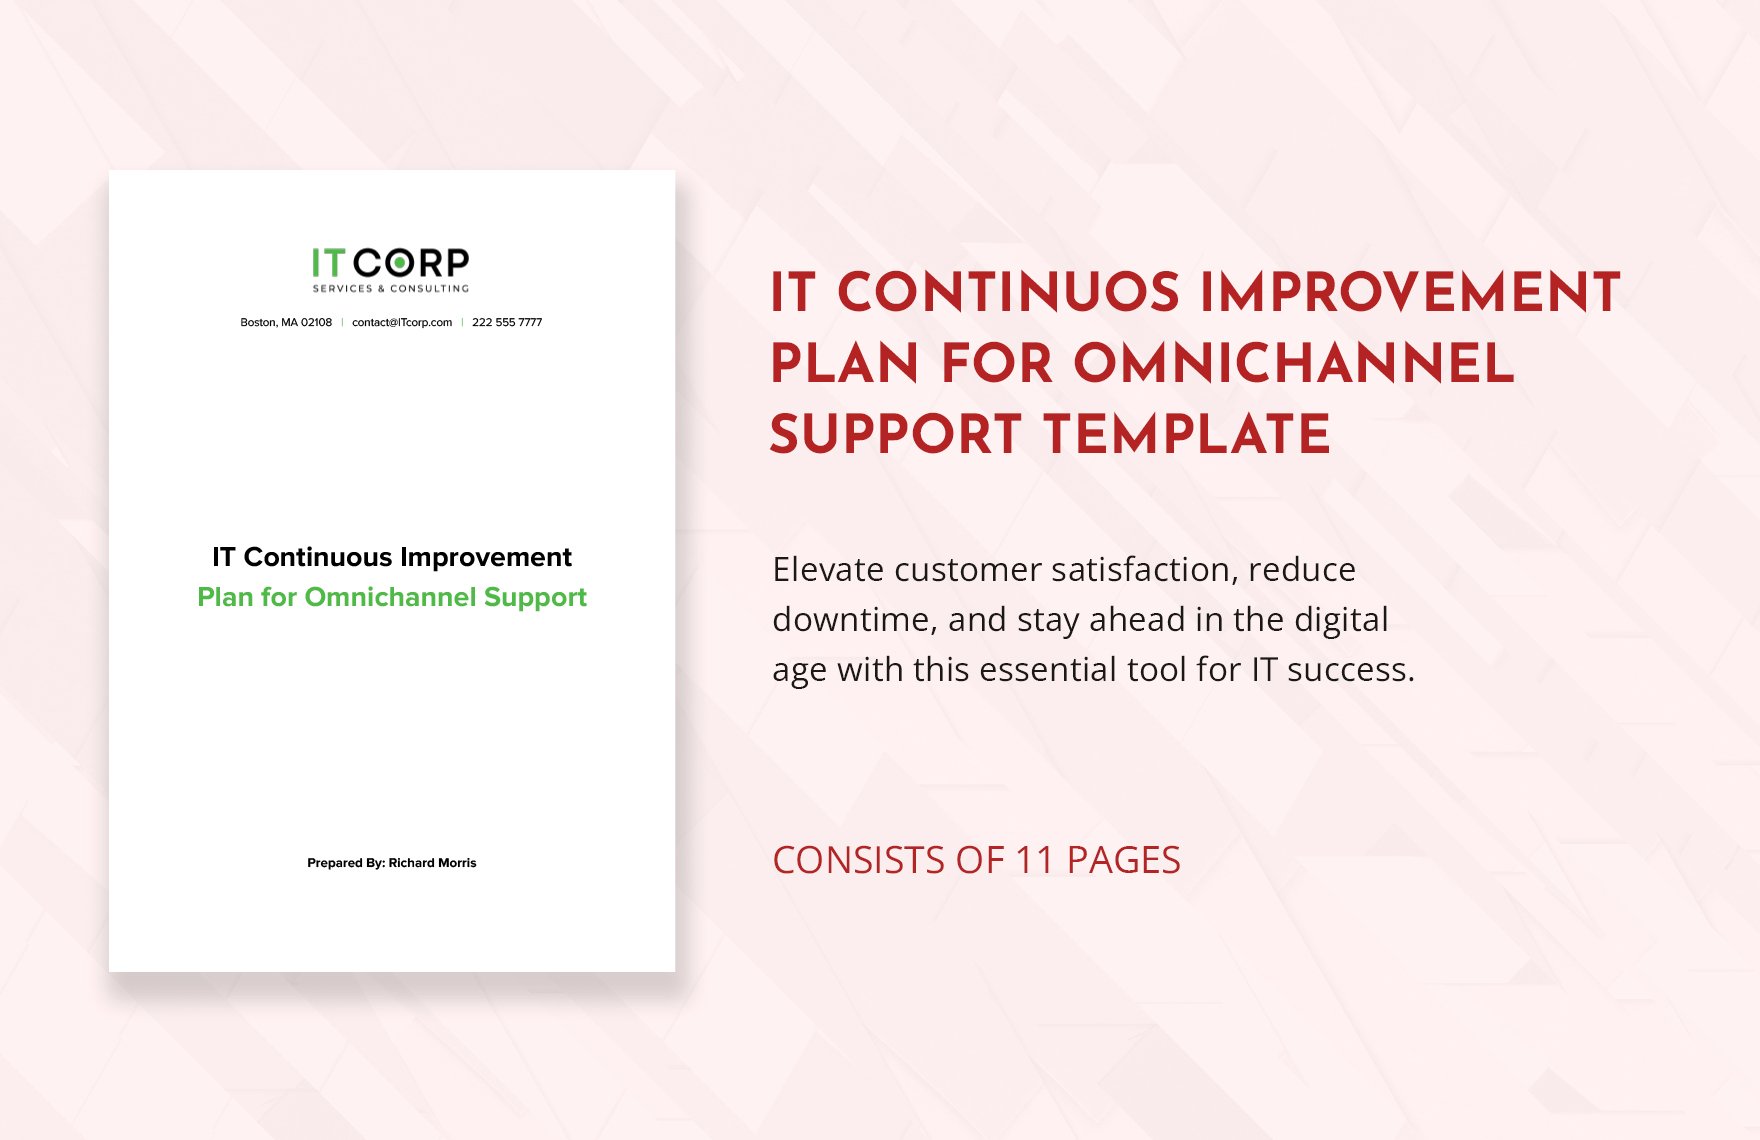 IT Continuous Improvement Plan for Omnichannel Support Template